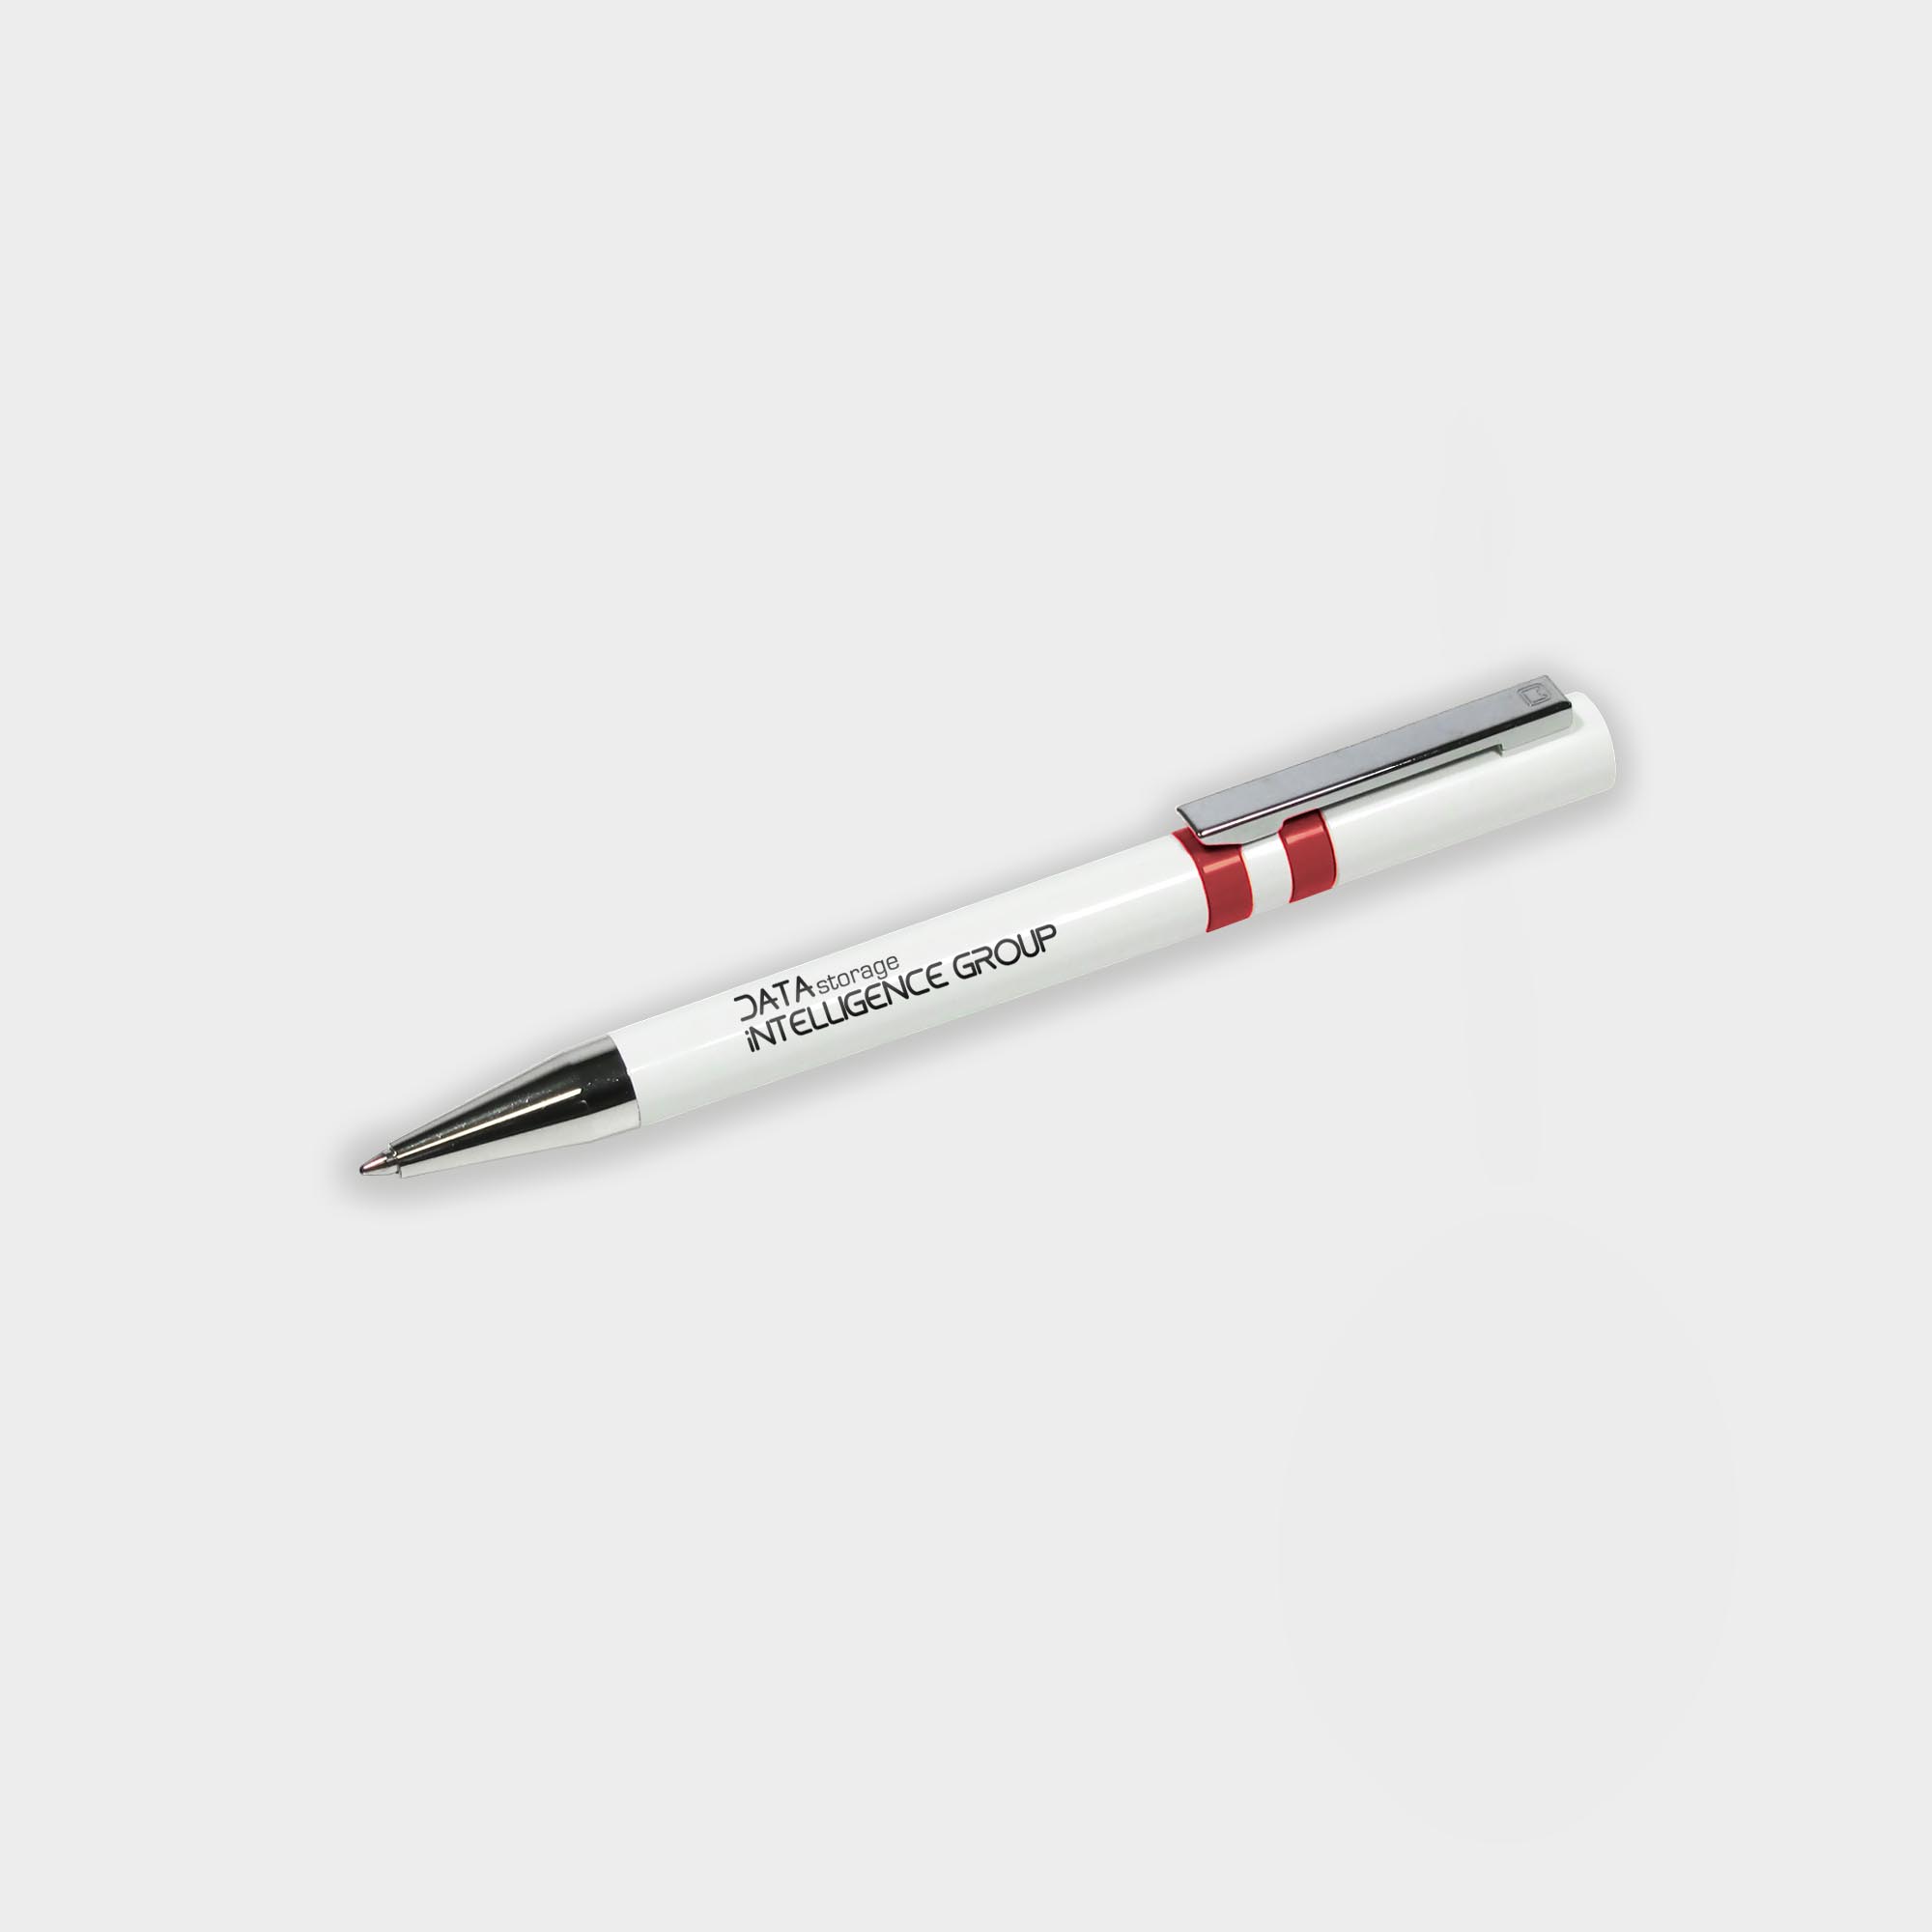 The Green & Good Ethic Pen made from recycled plastic. Stylish executive pen with chrome tip and various colour upon request. Black ink as standard. White / Red